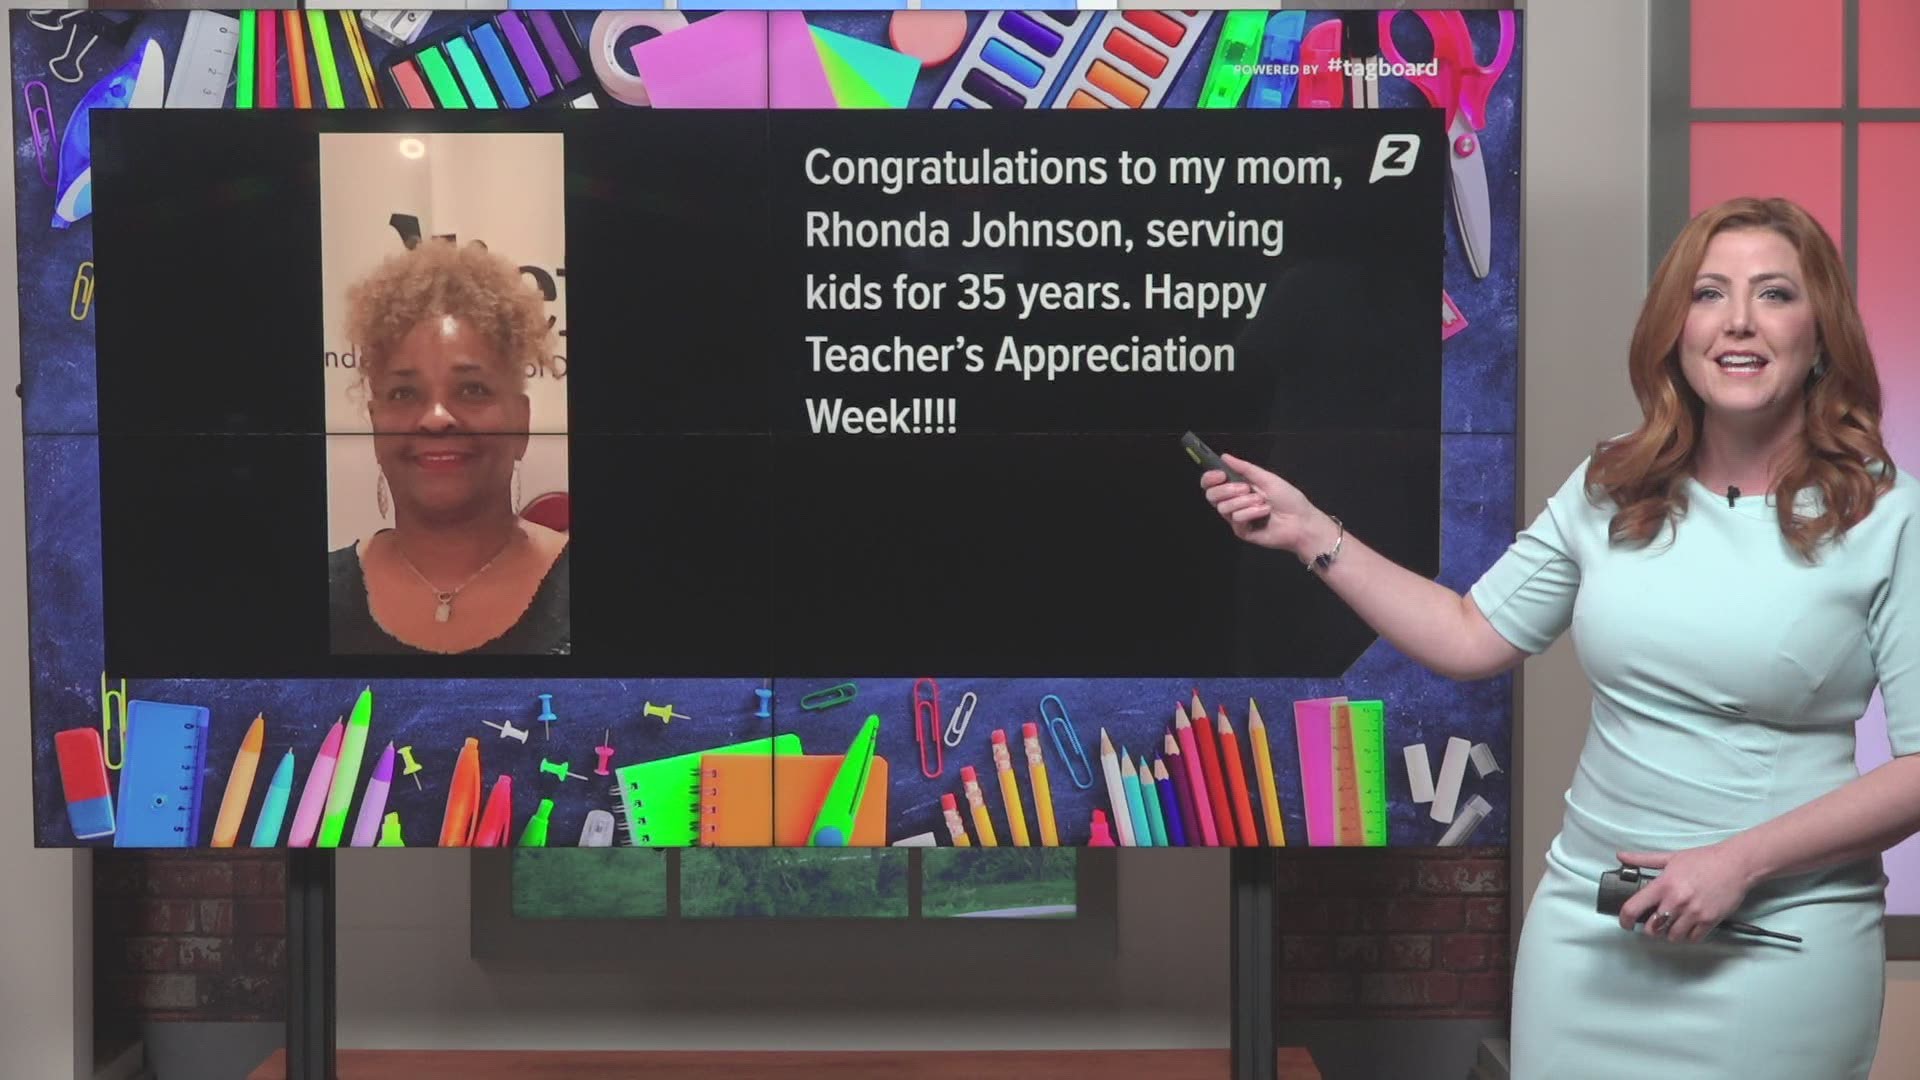 #HTownRush wants to hear from you: which teacher made an impact in your life? Text us at 713-562-1111.